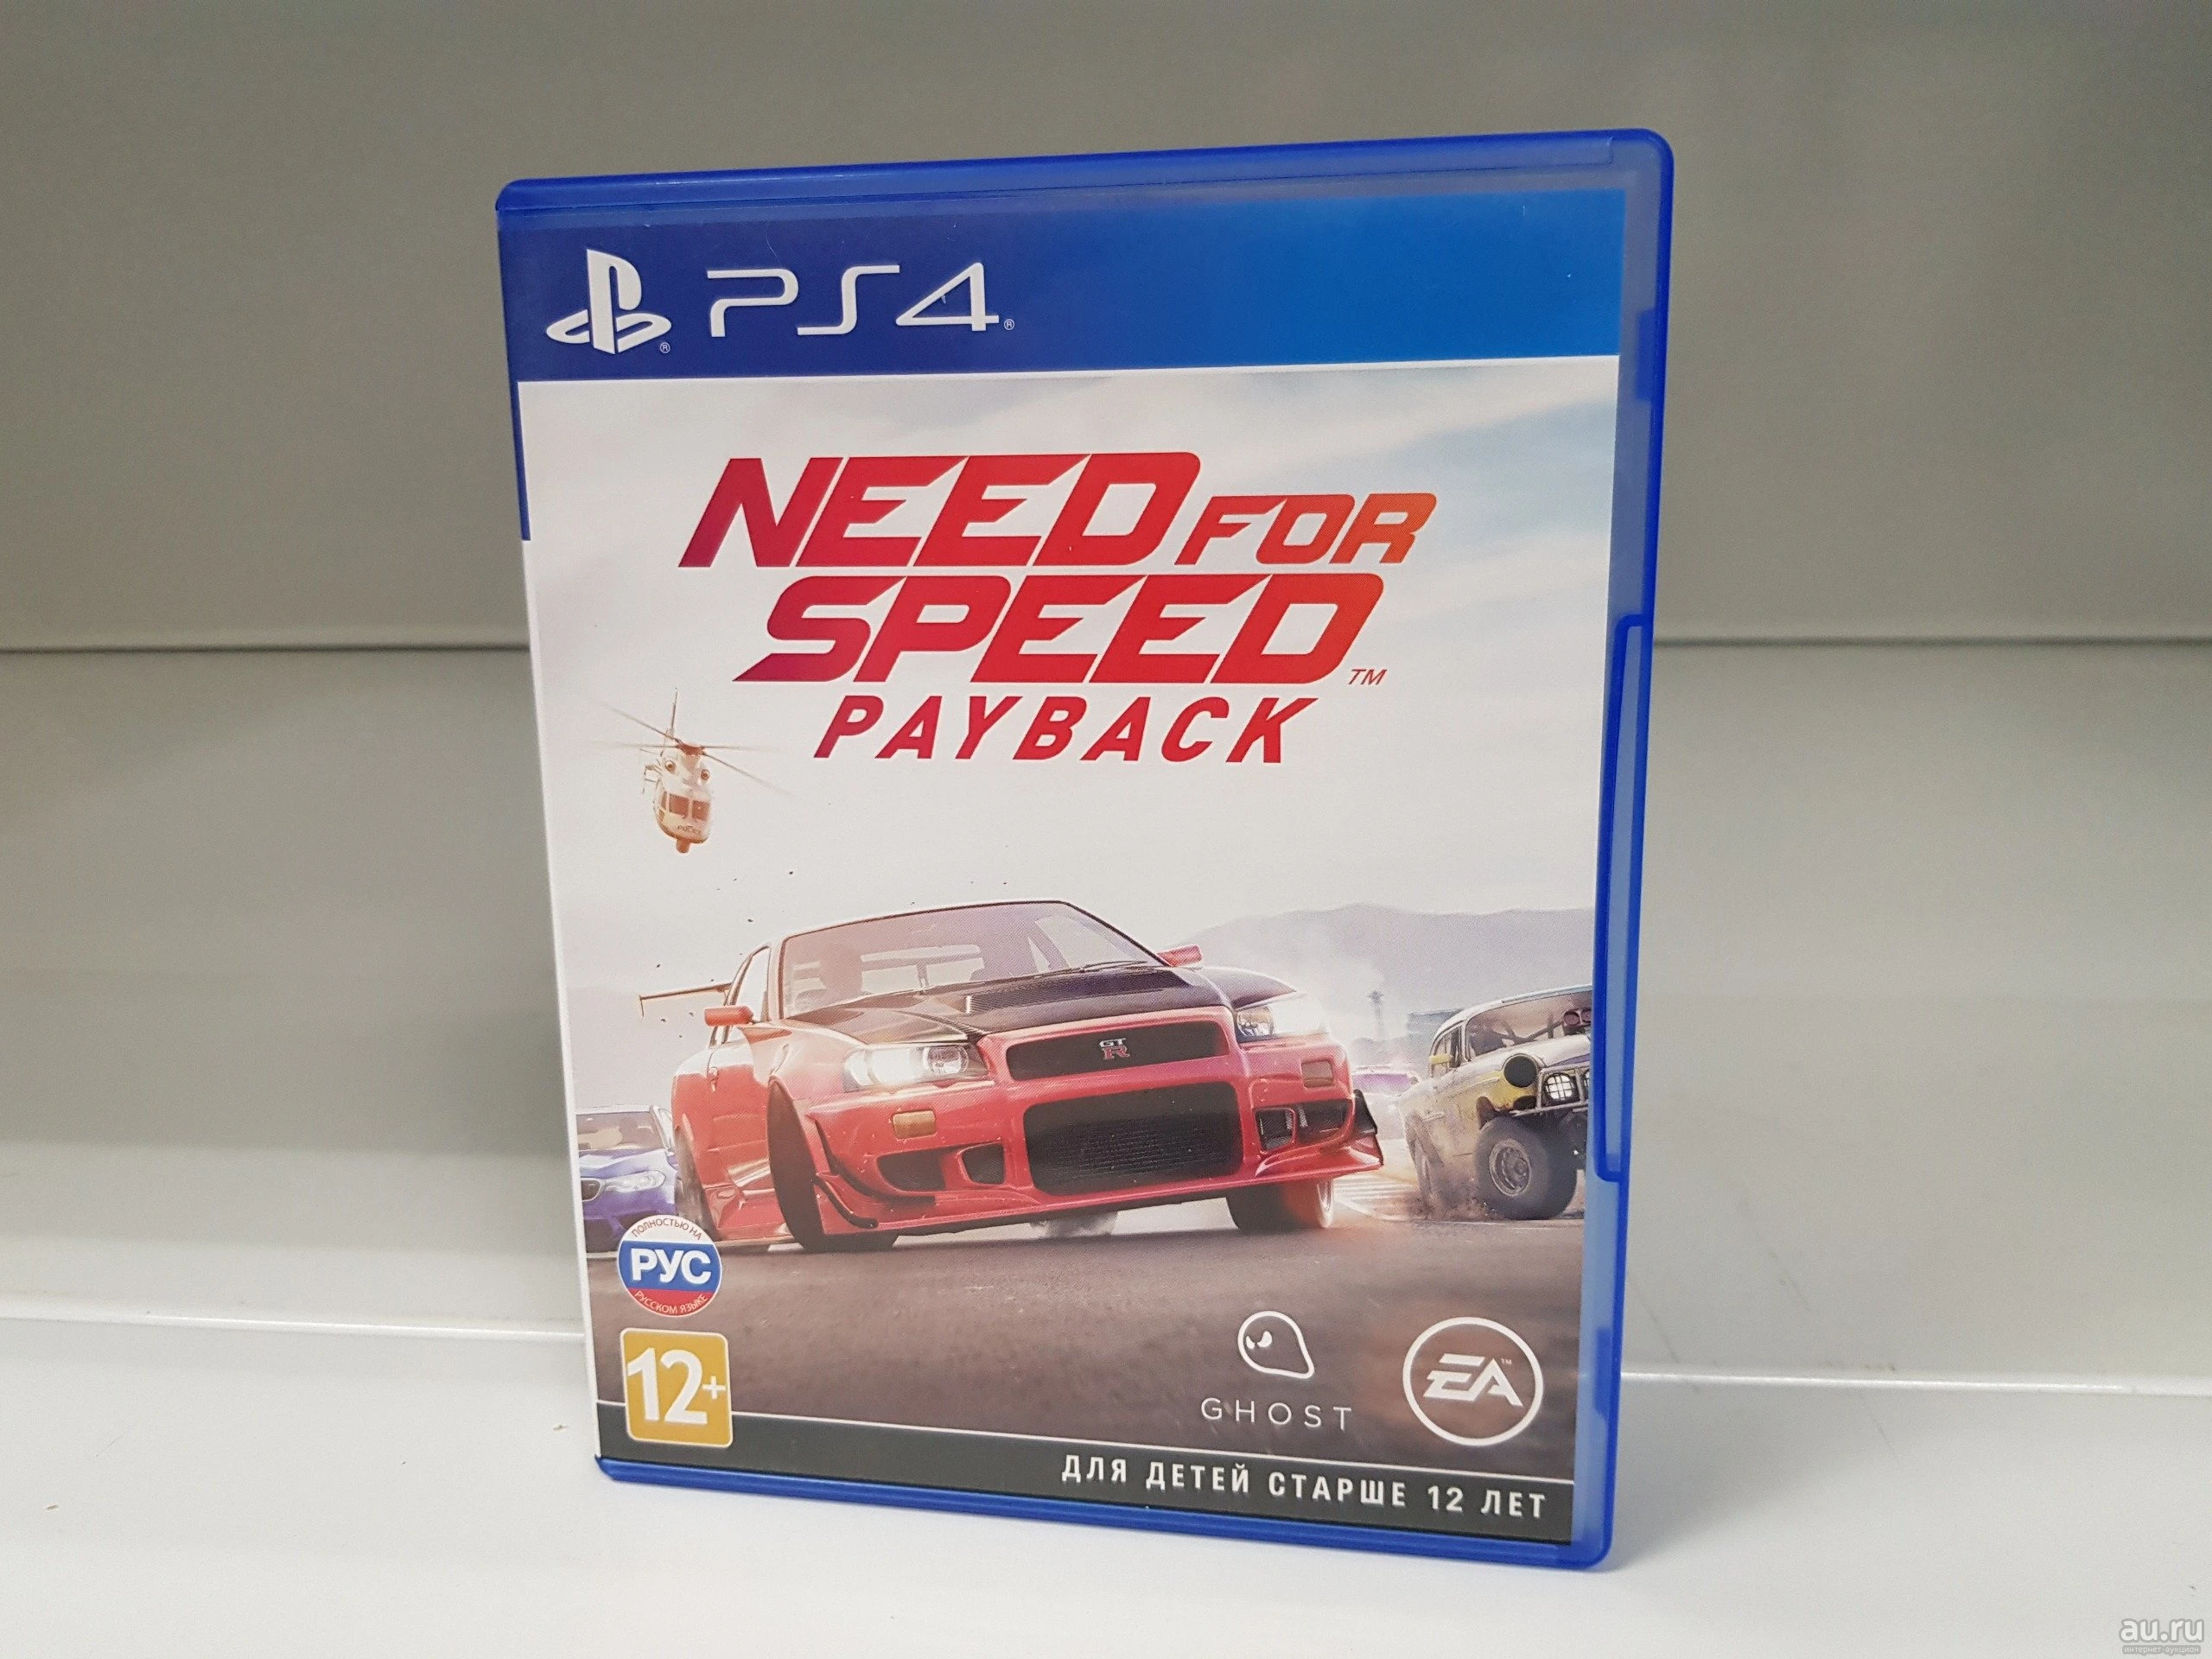 Need for Speed Payback пс4. NFS Payback ps4 диск. Need for Speed диск на ПС 4. Need for Speed Payback (ps4). Nfs payback ps4